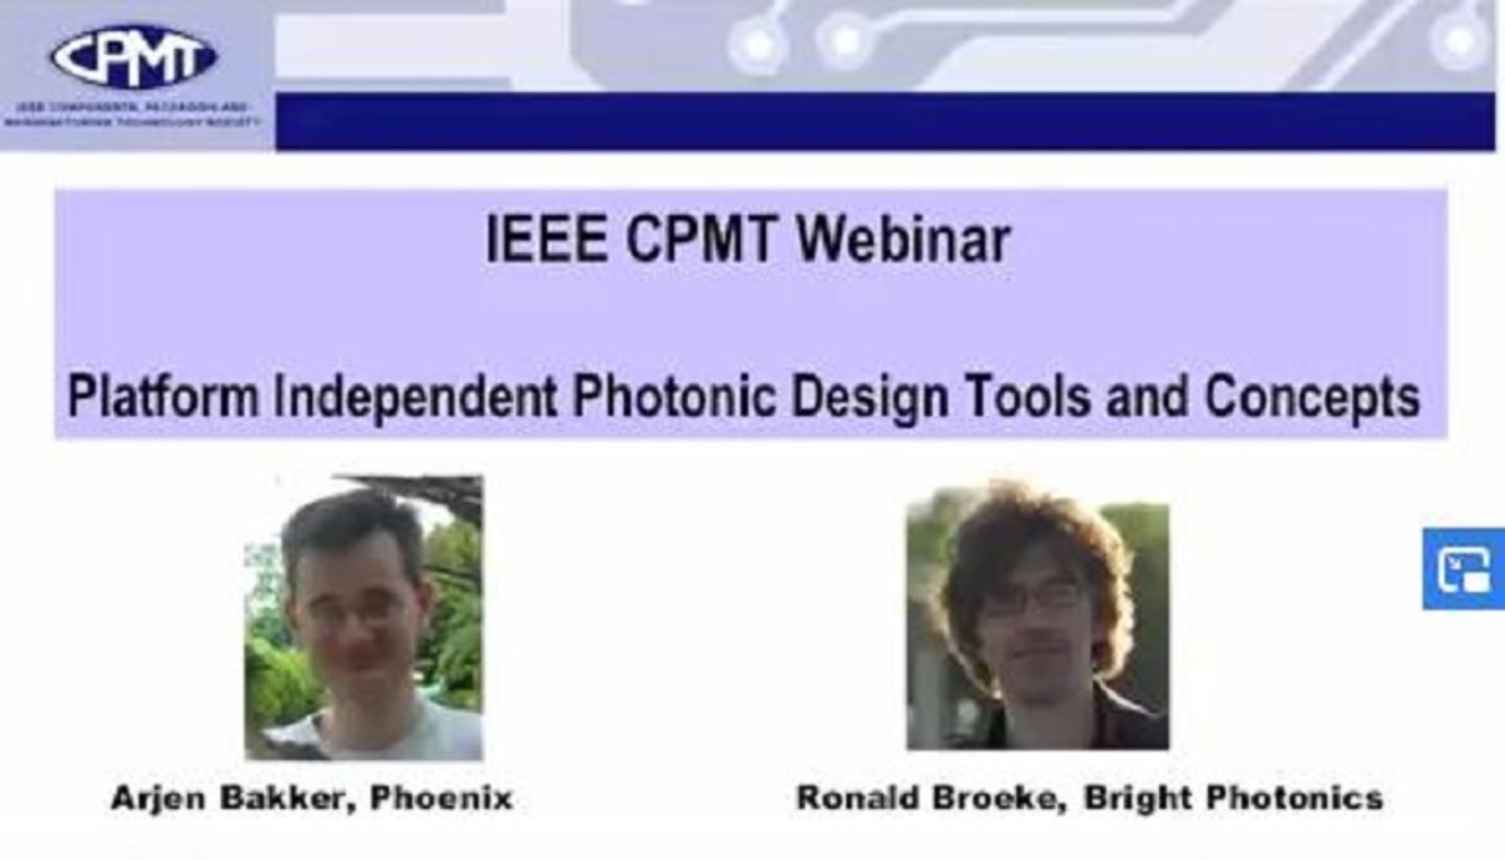 Platform Independent Photonic Design Tools and Concepts